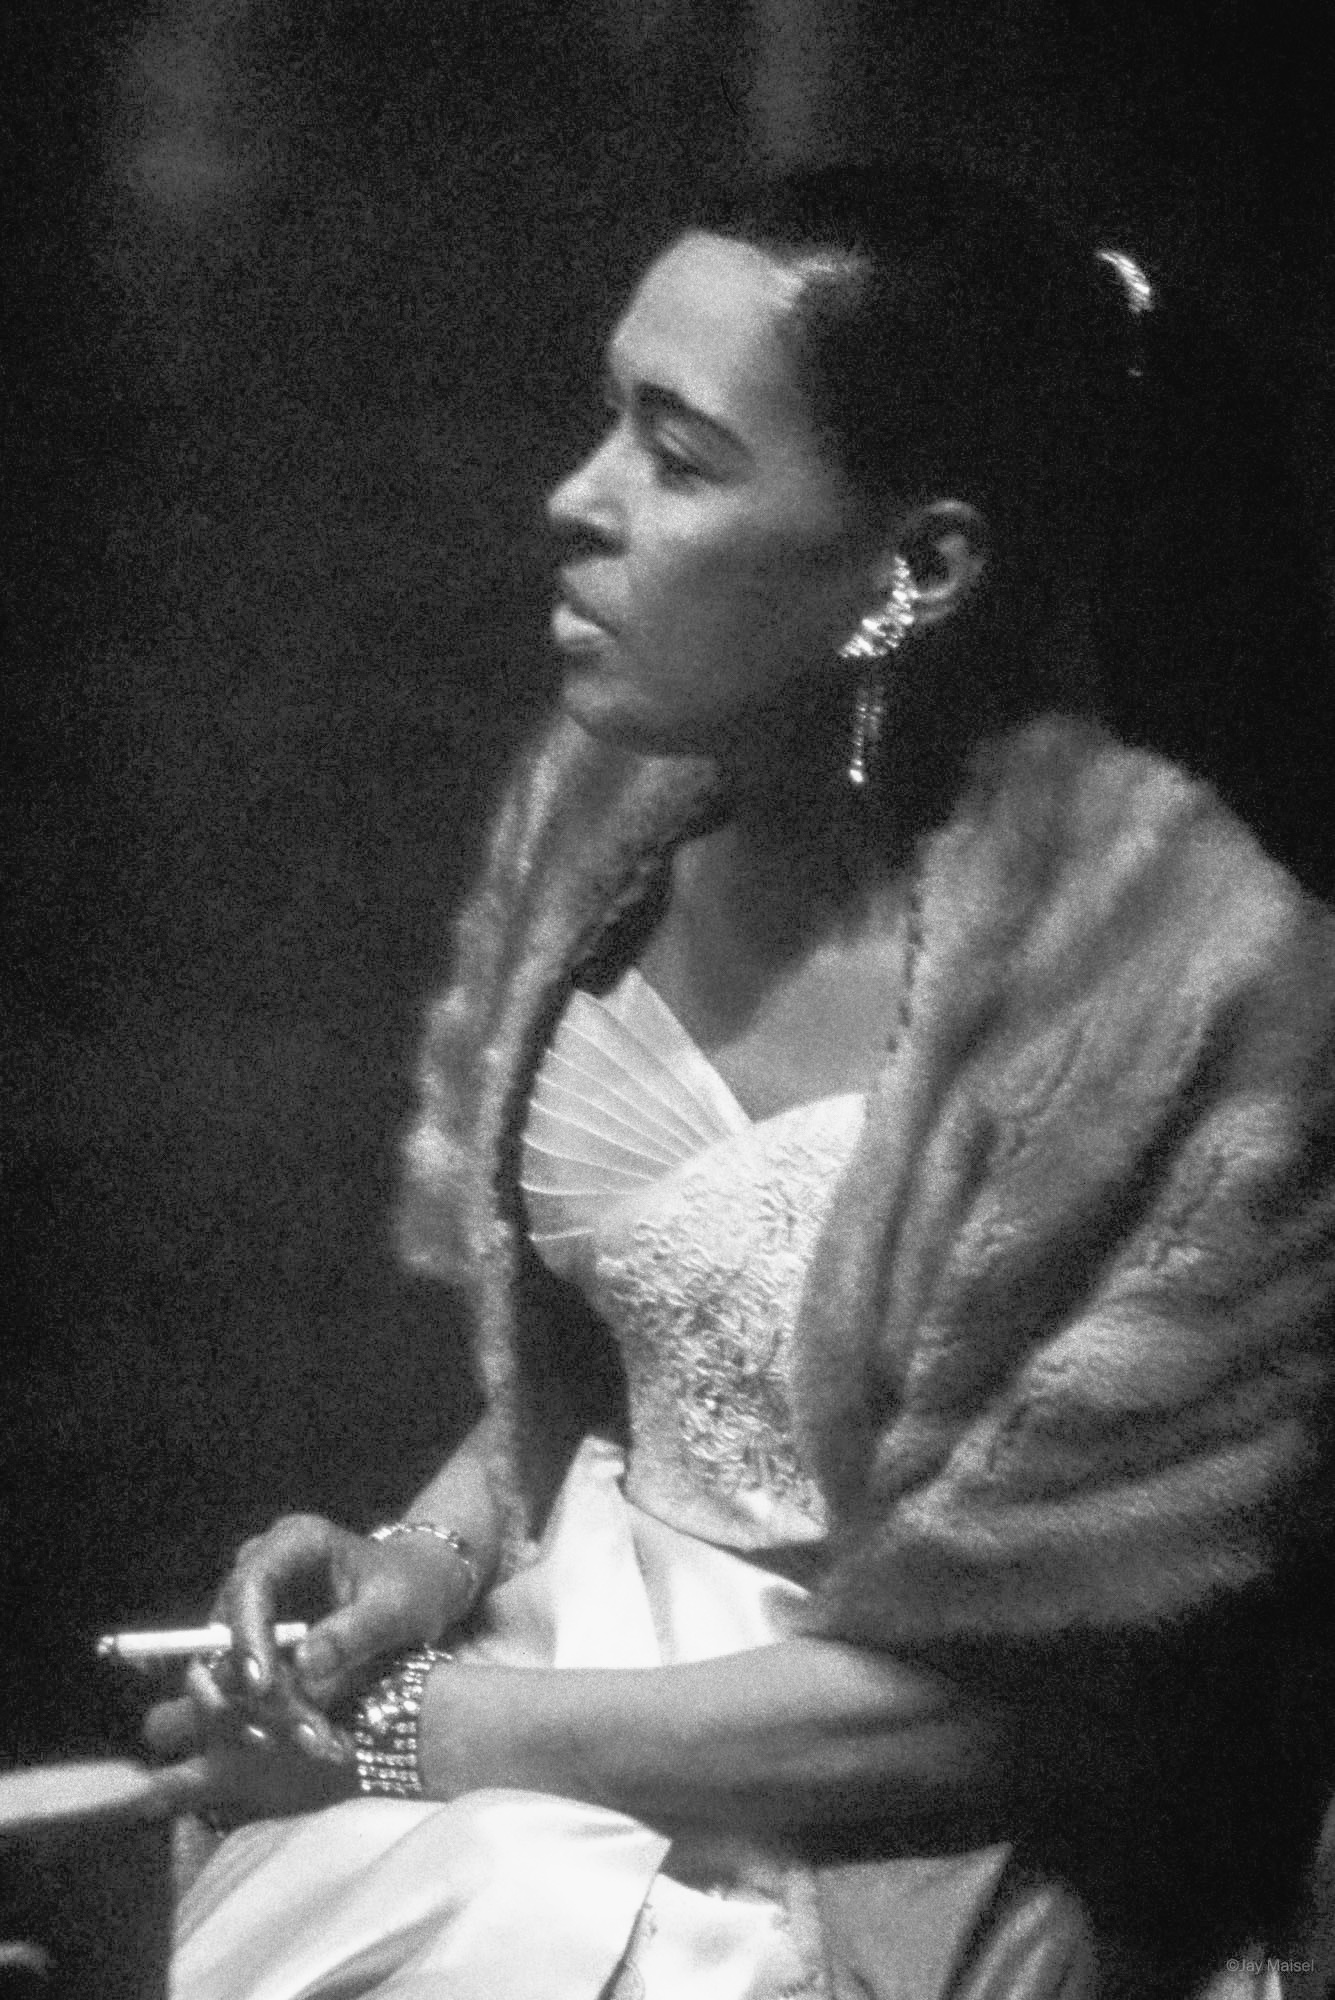 Billie Holiday photographed by Jay Maisel during the last year of her life. Photo by Jay Maisel.